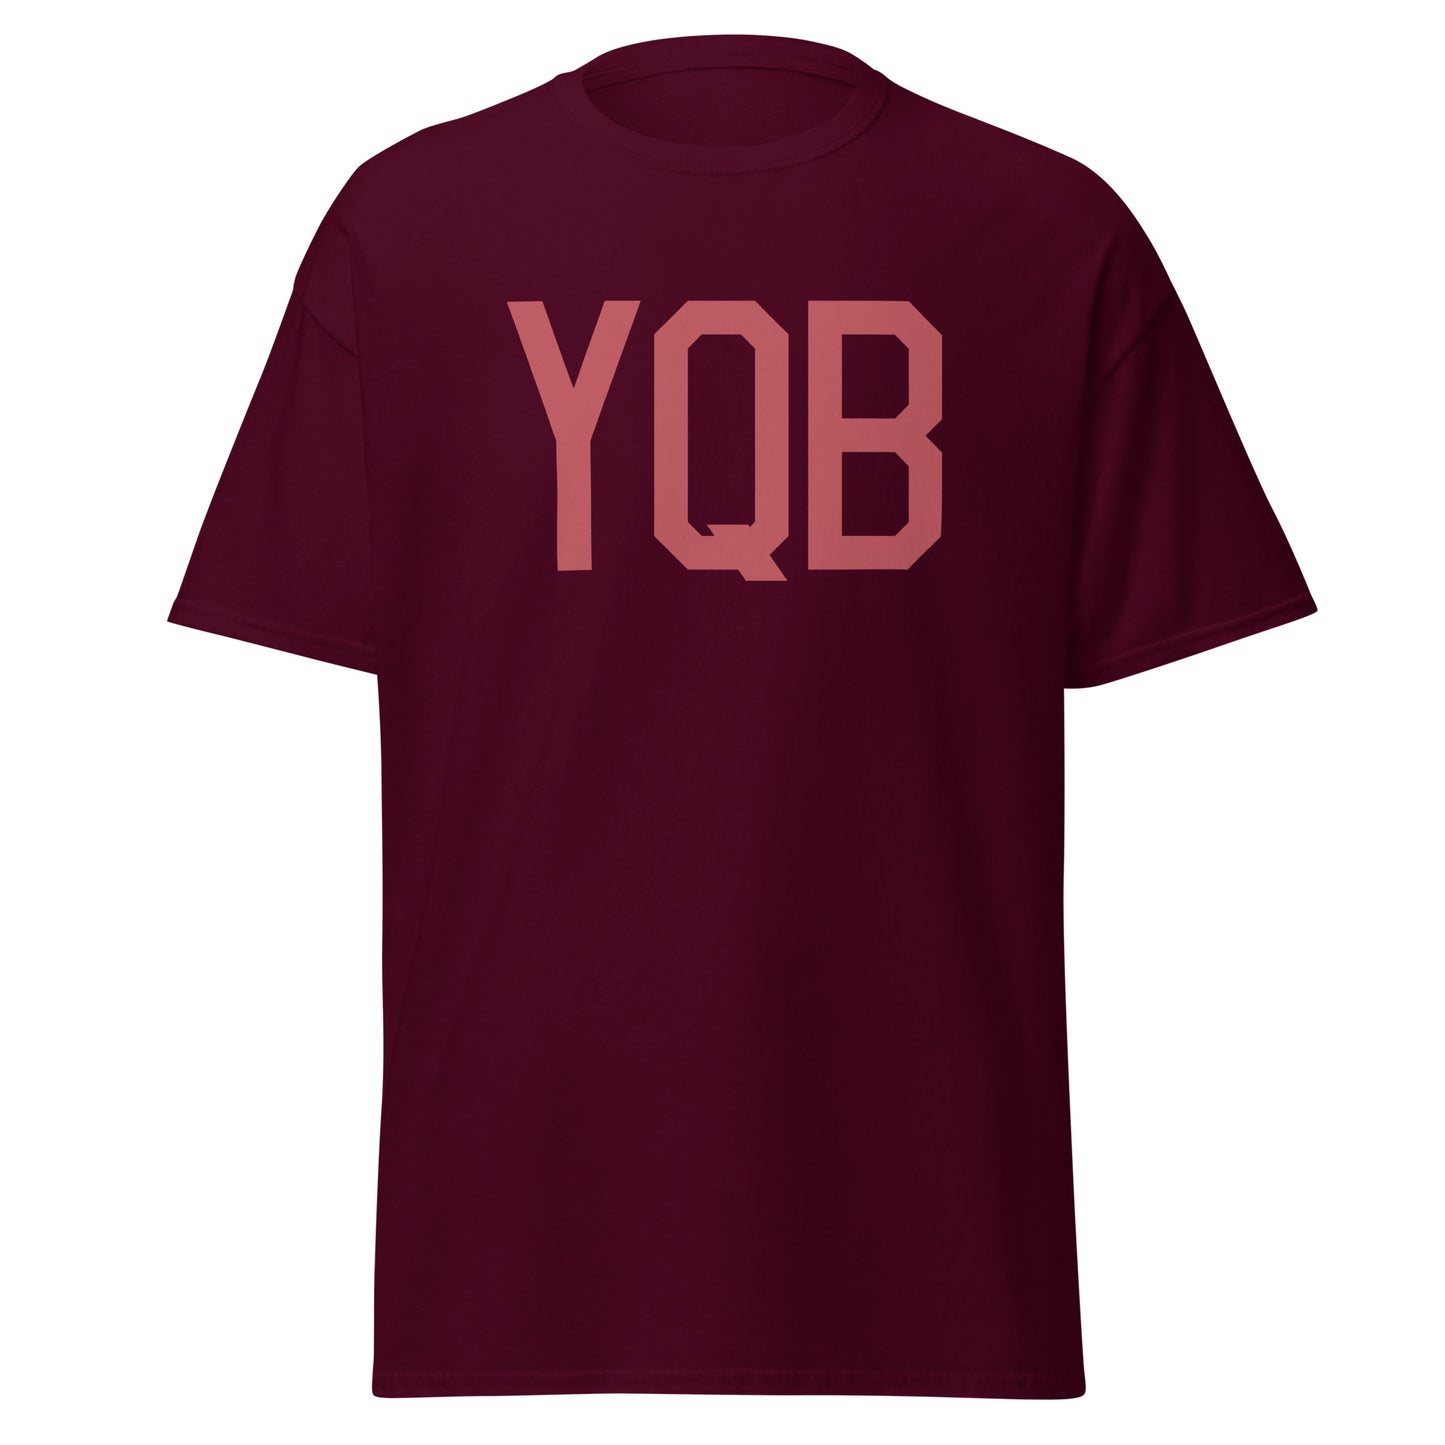 Aviation Enthusiast Men's Tee - Deep Pink Graphic • YQB Quebec City • YHM Designs - Image 05